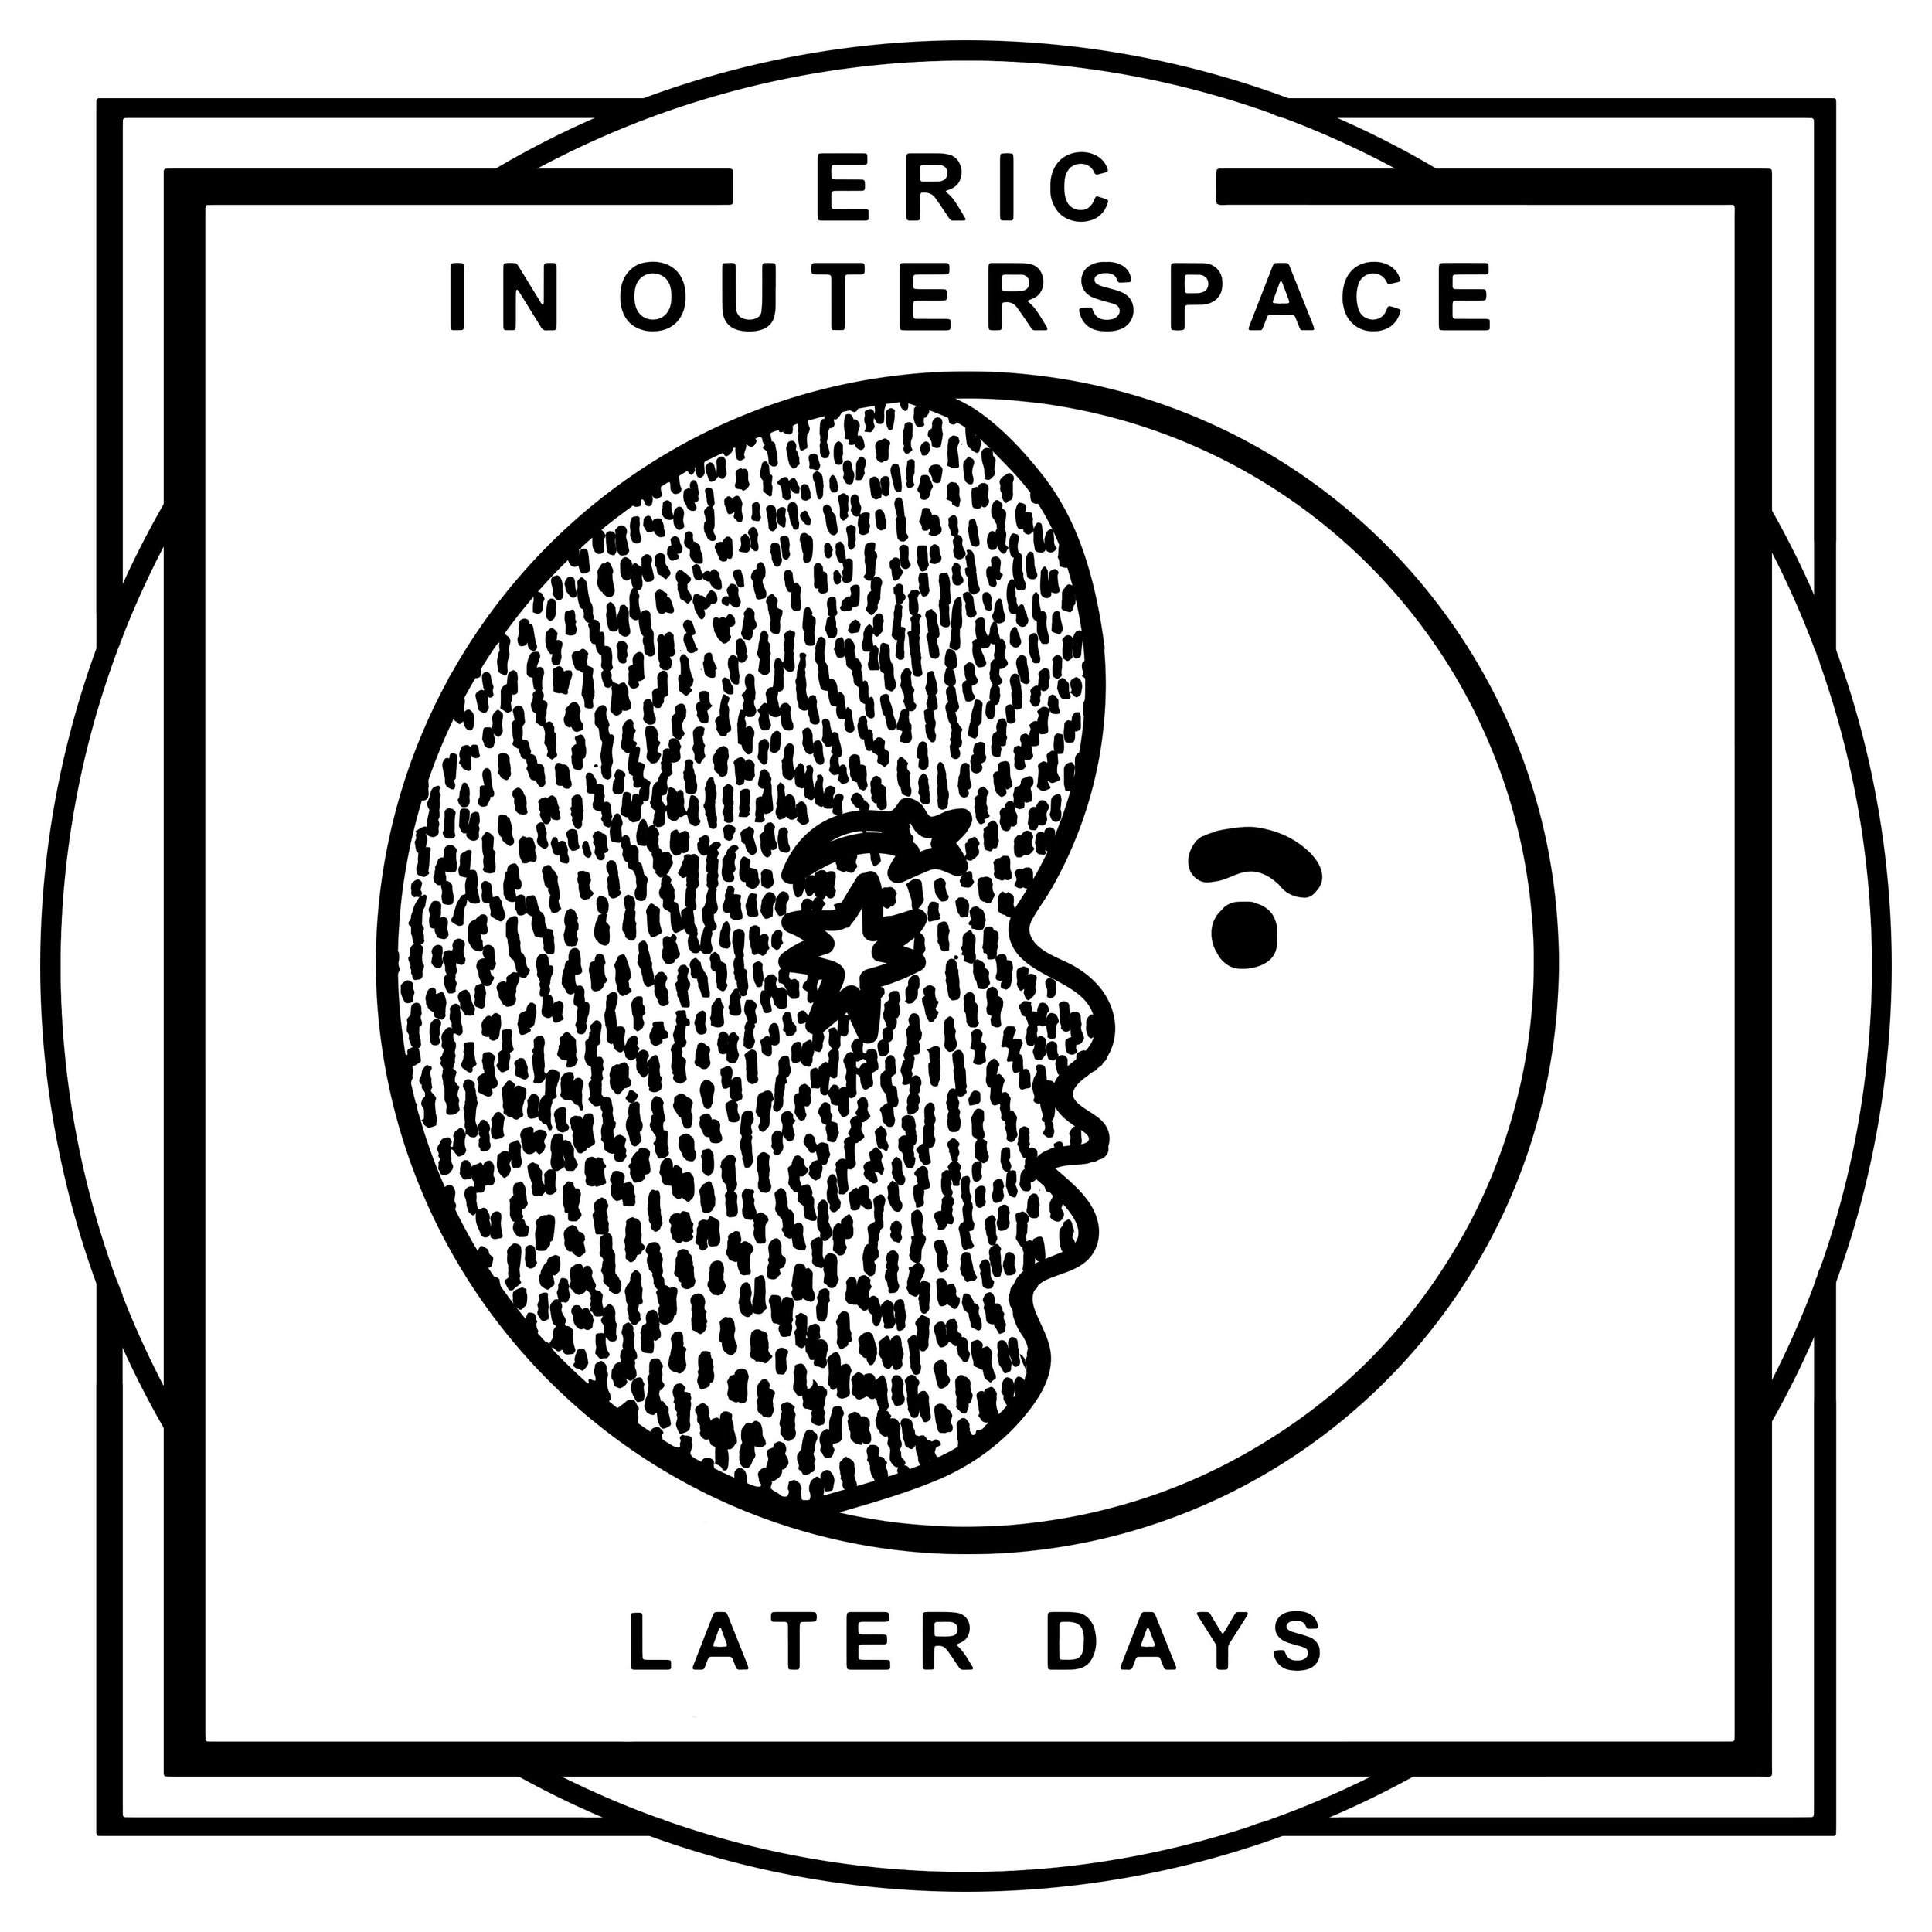 Eric in Outerspace